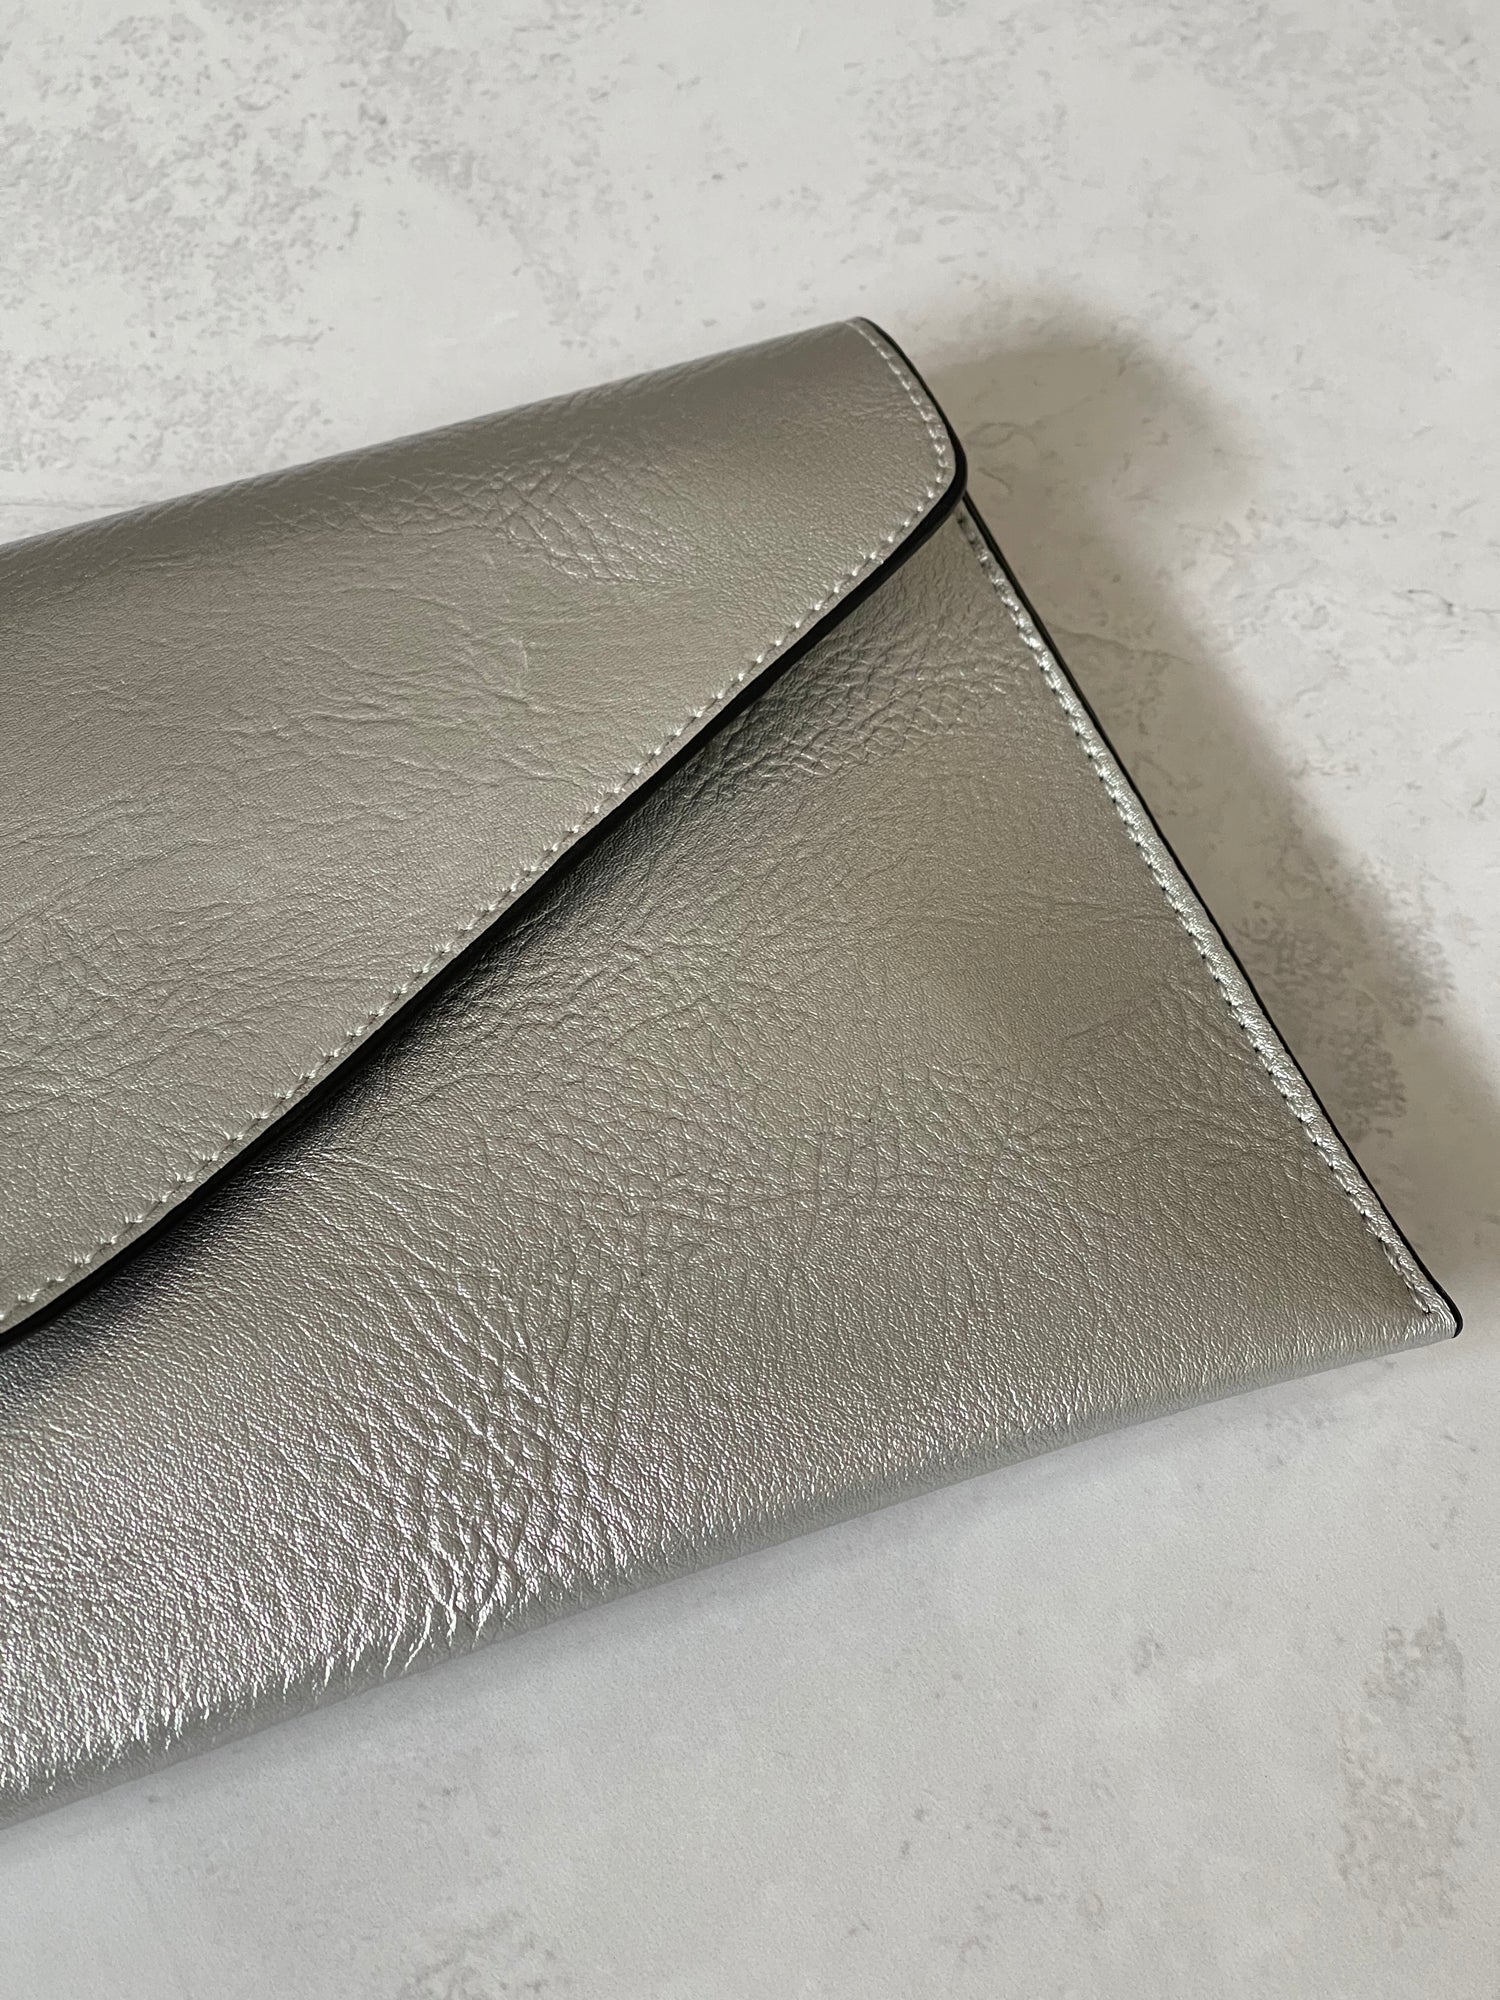 METALLIC SILVER OVER-SIZED ENVELOPE CLUTCH BAG WITH LONG CROSS BODY AND WRISTLET STRAP